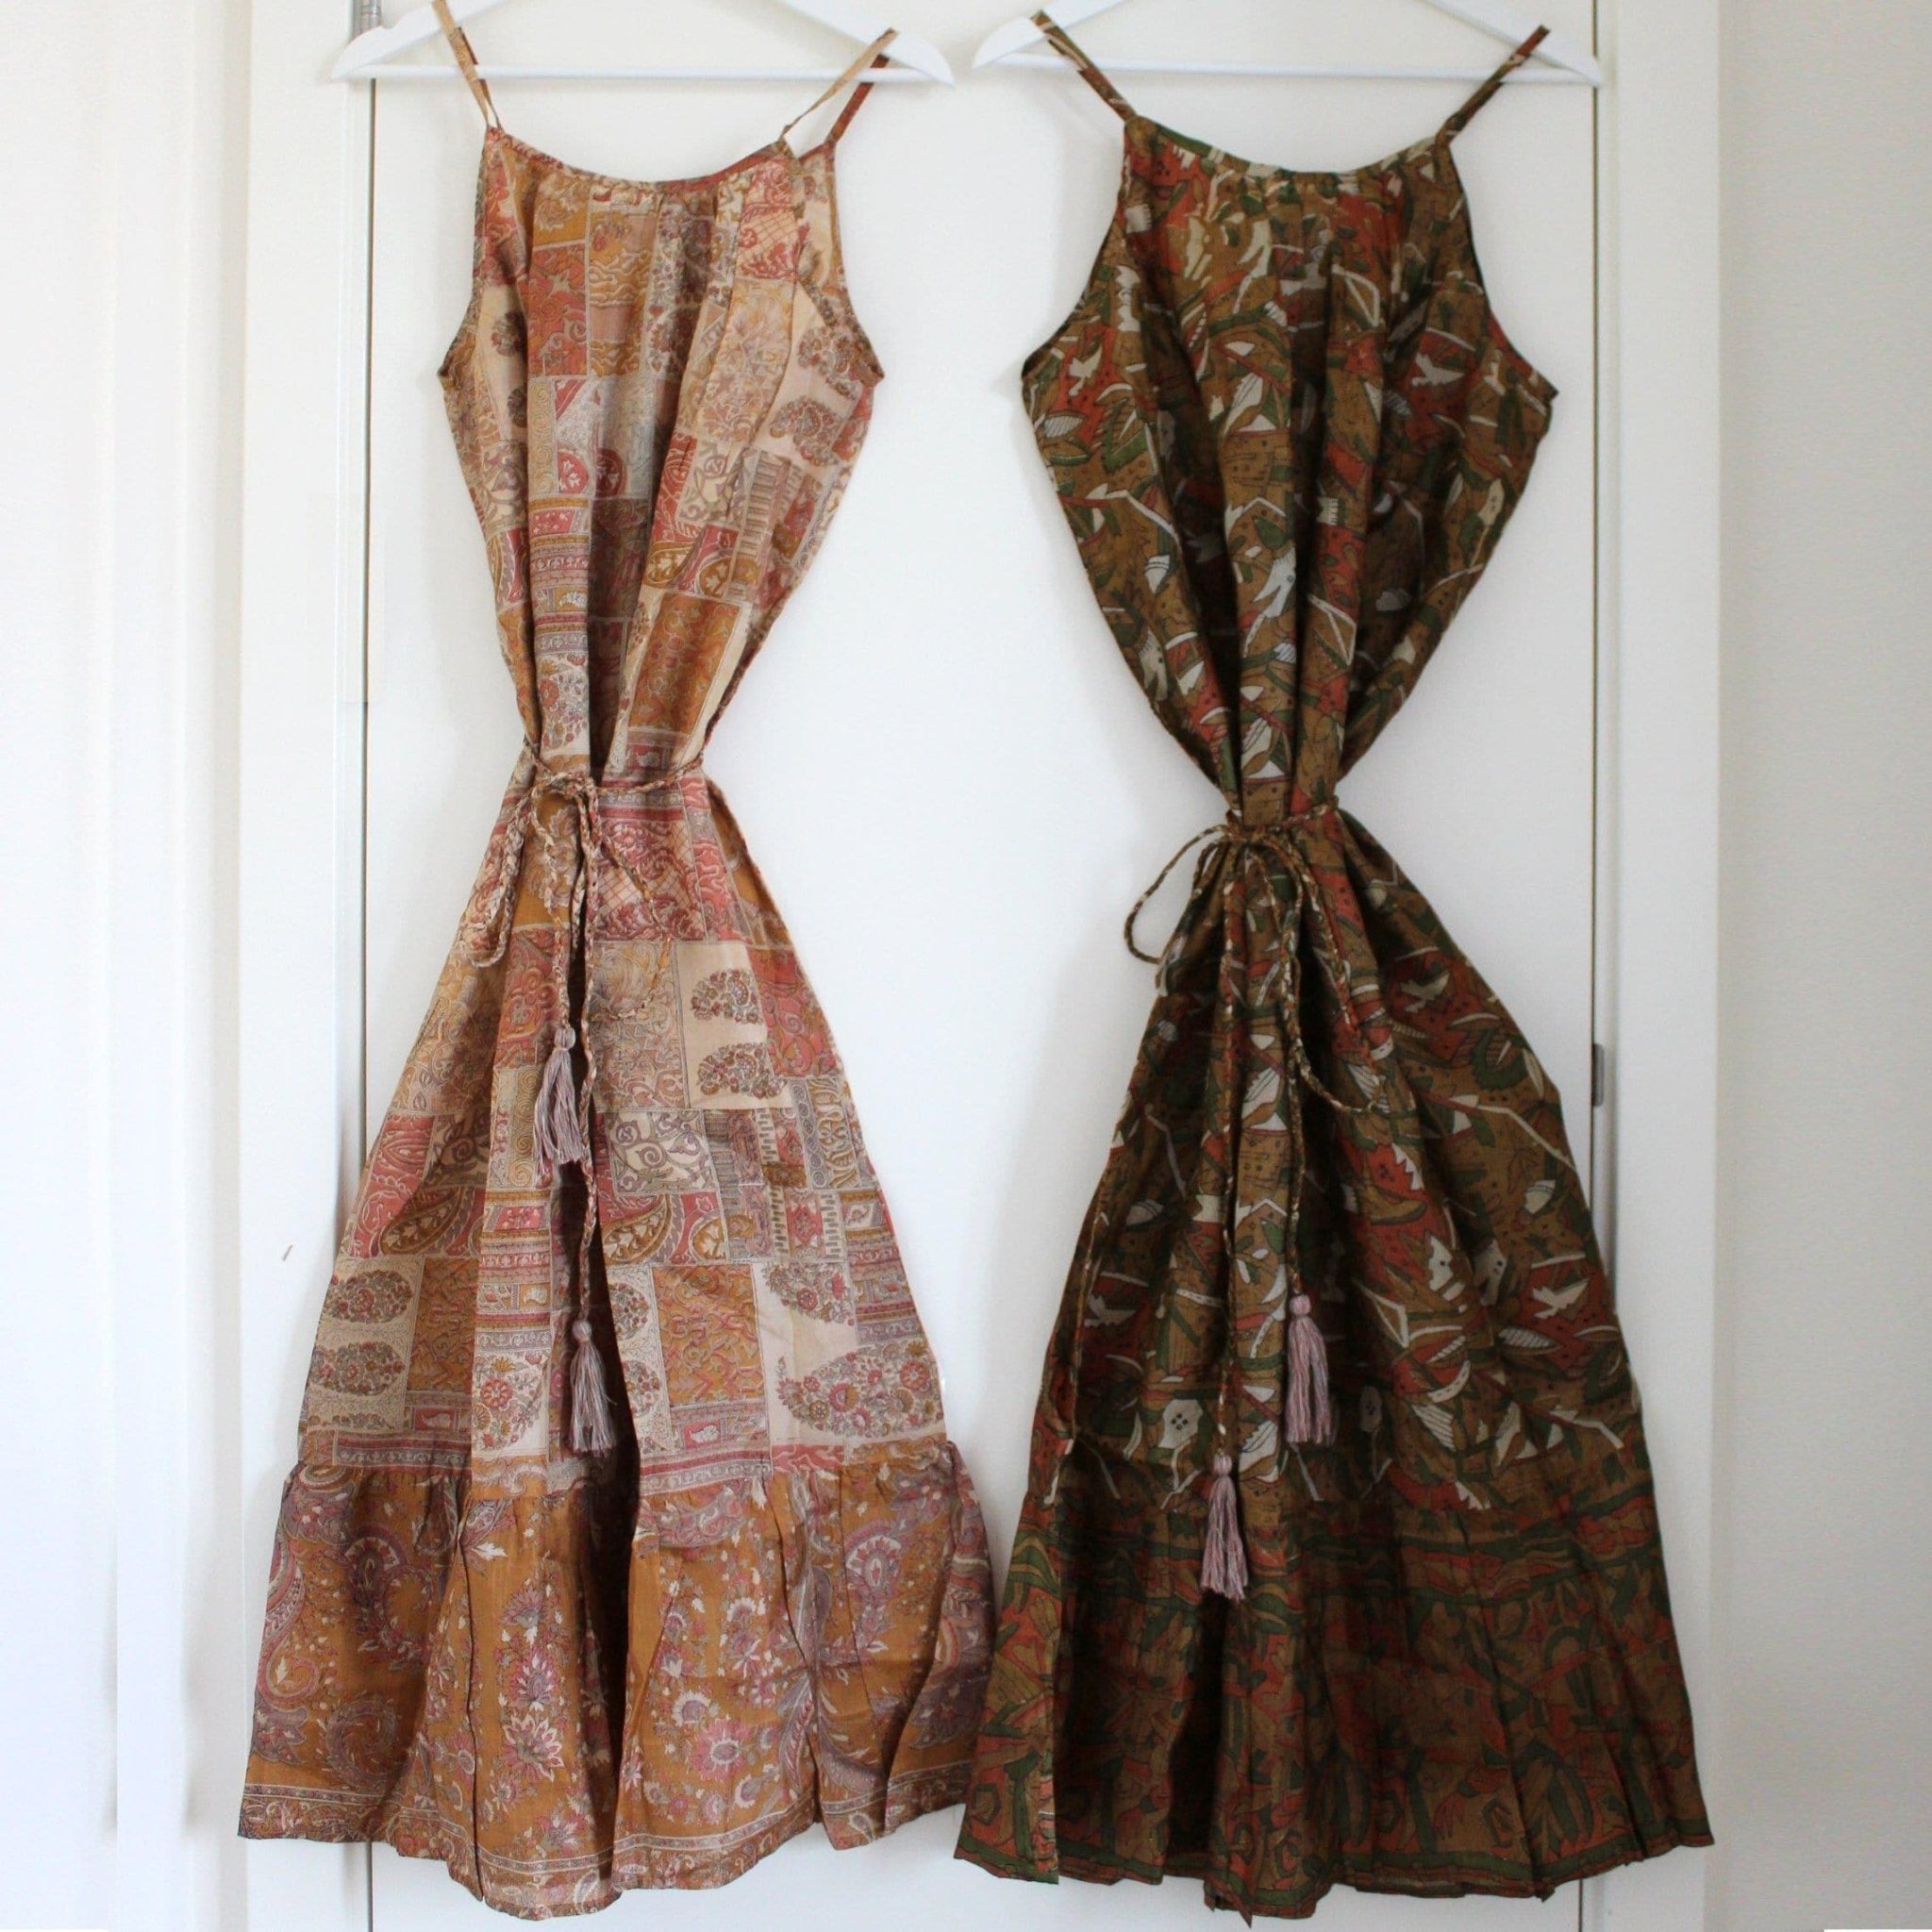 2 Recycled Silk Dresses - Ammpoure Wellbeing